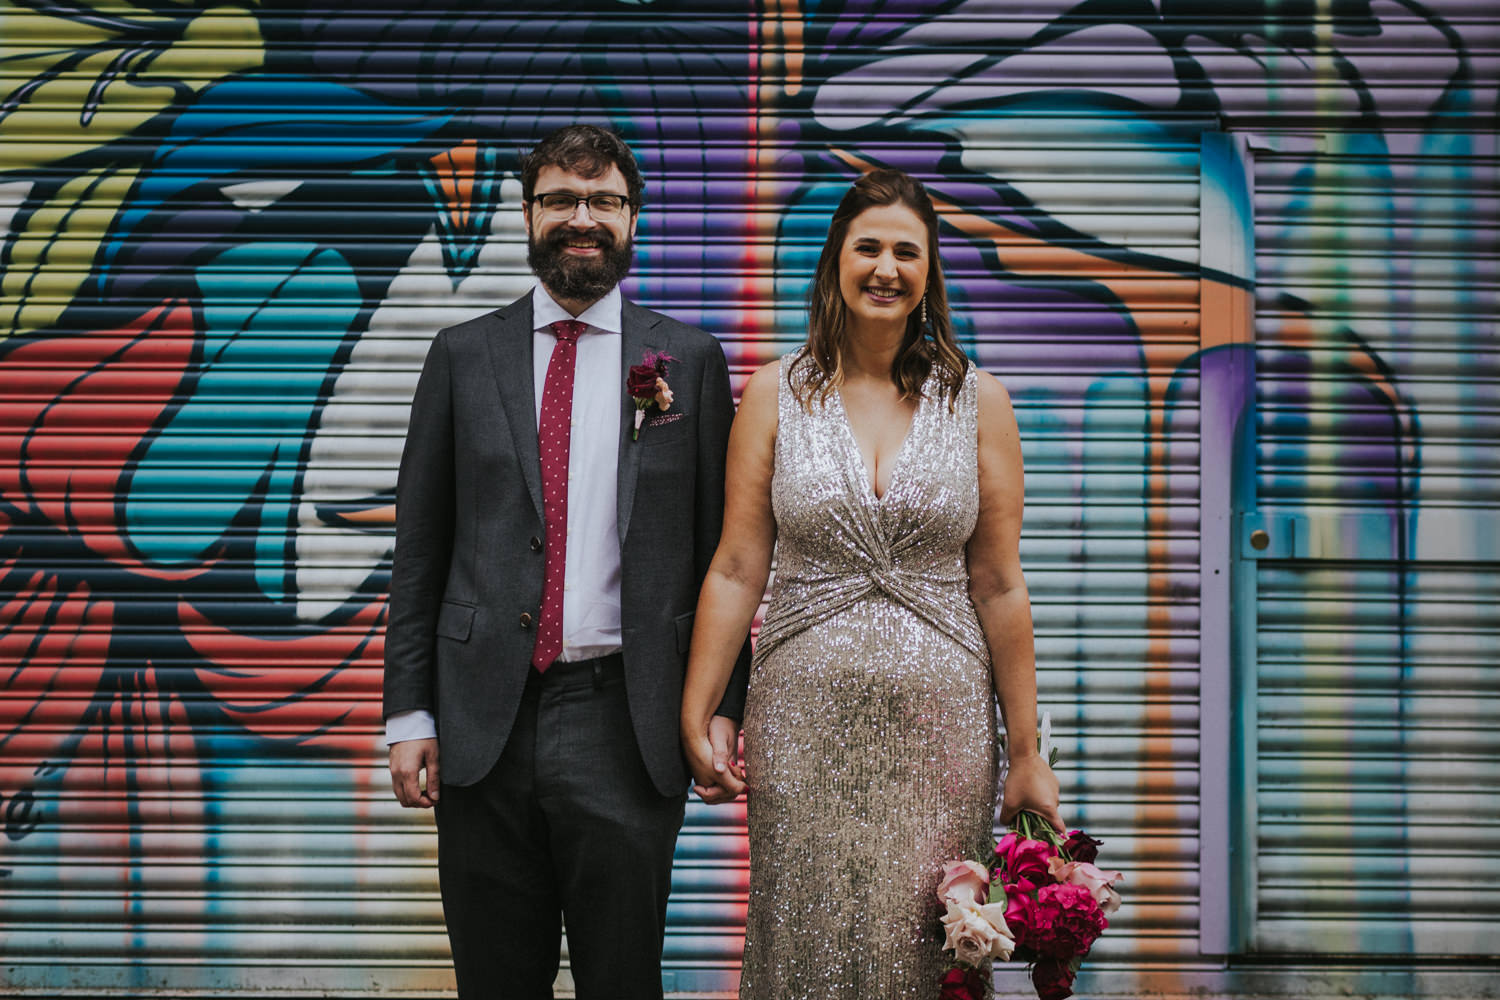 Bride and Groom in the streets of east London in front of street art.